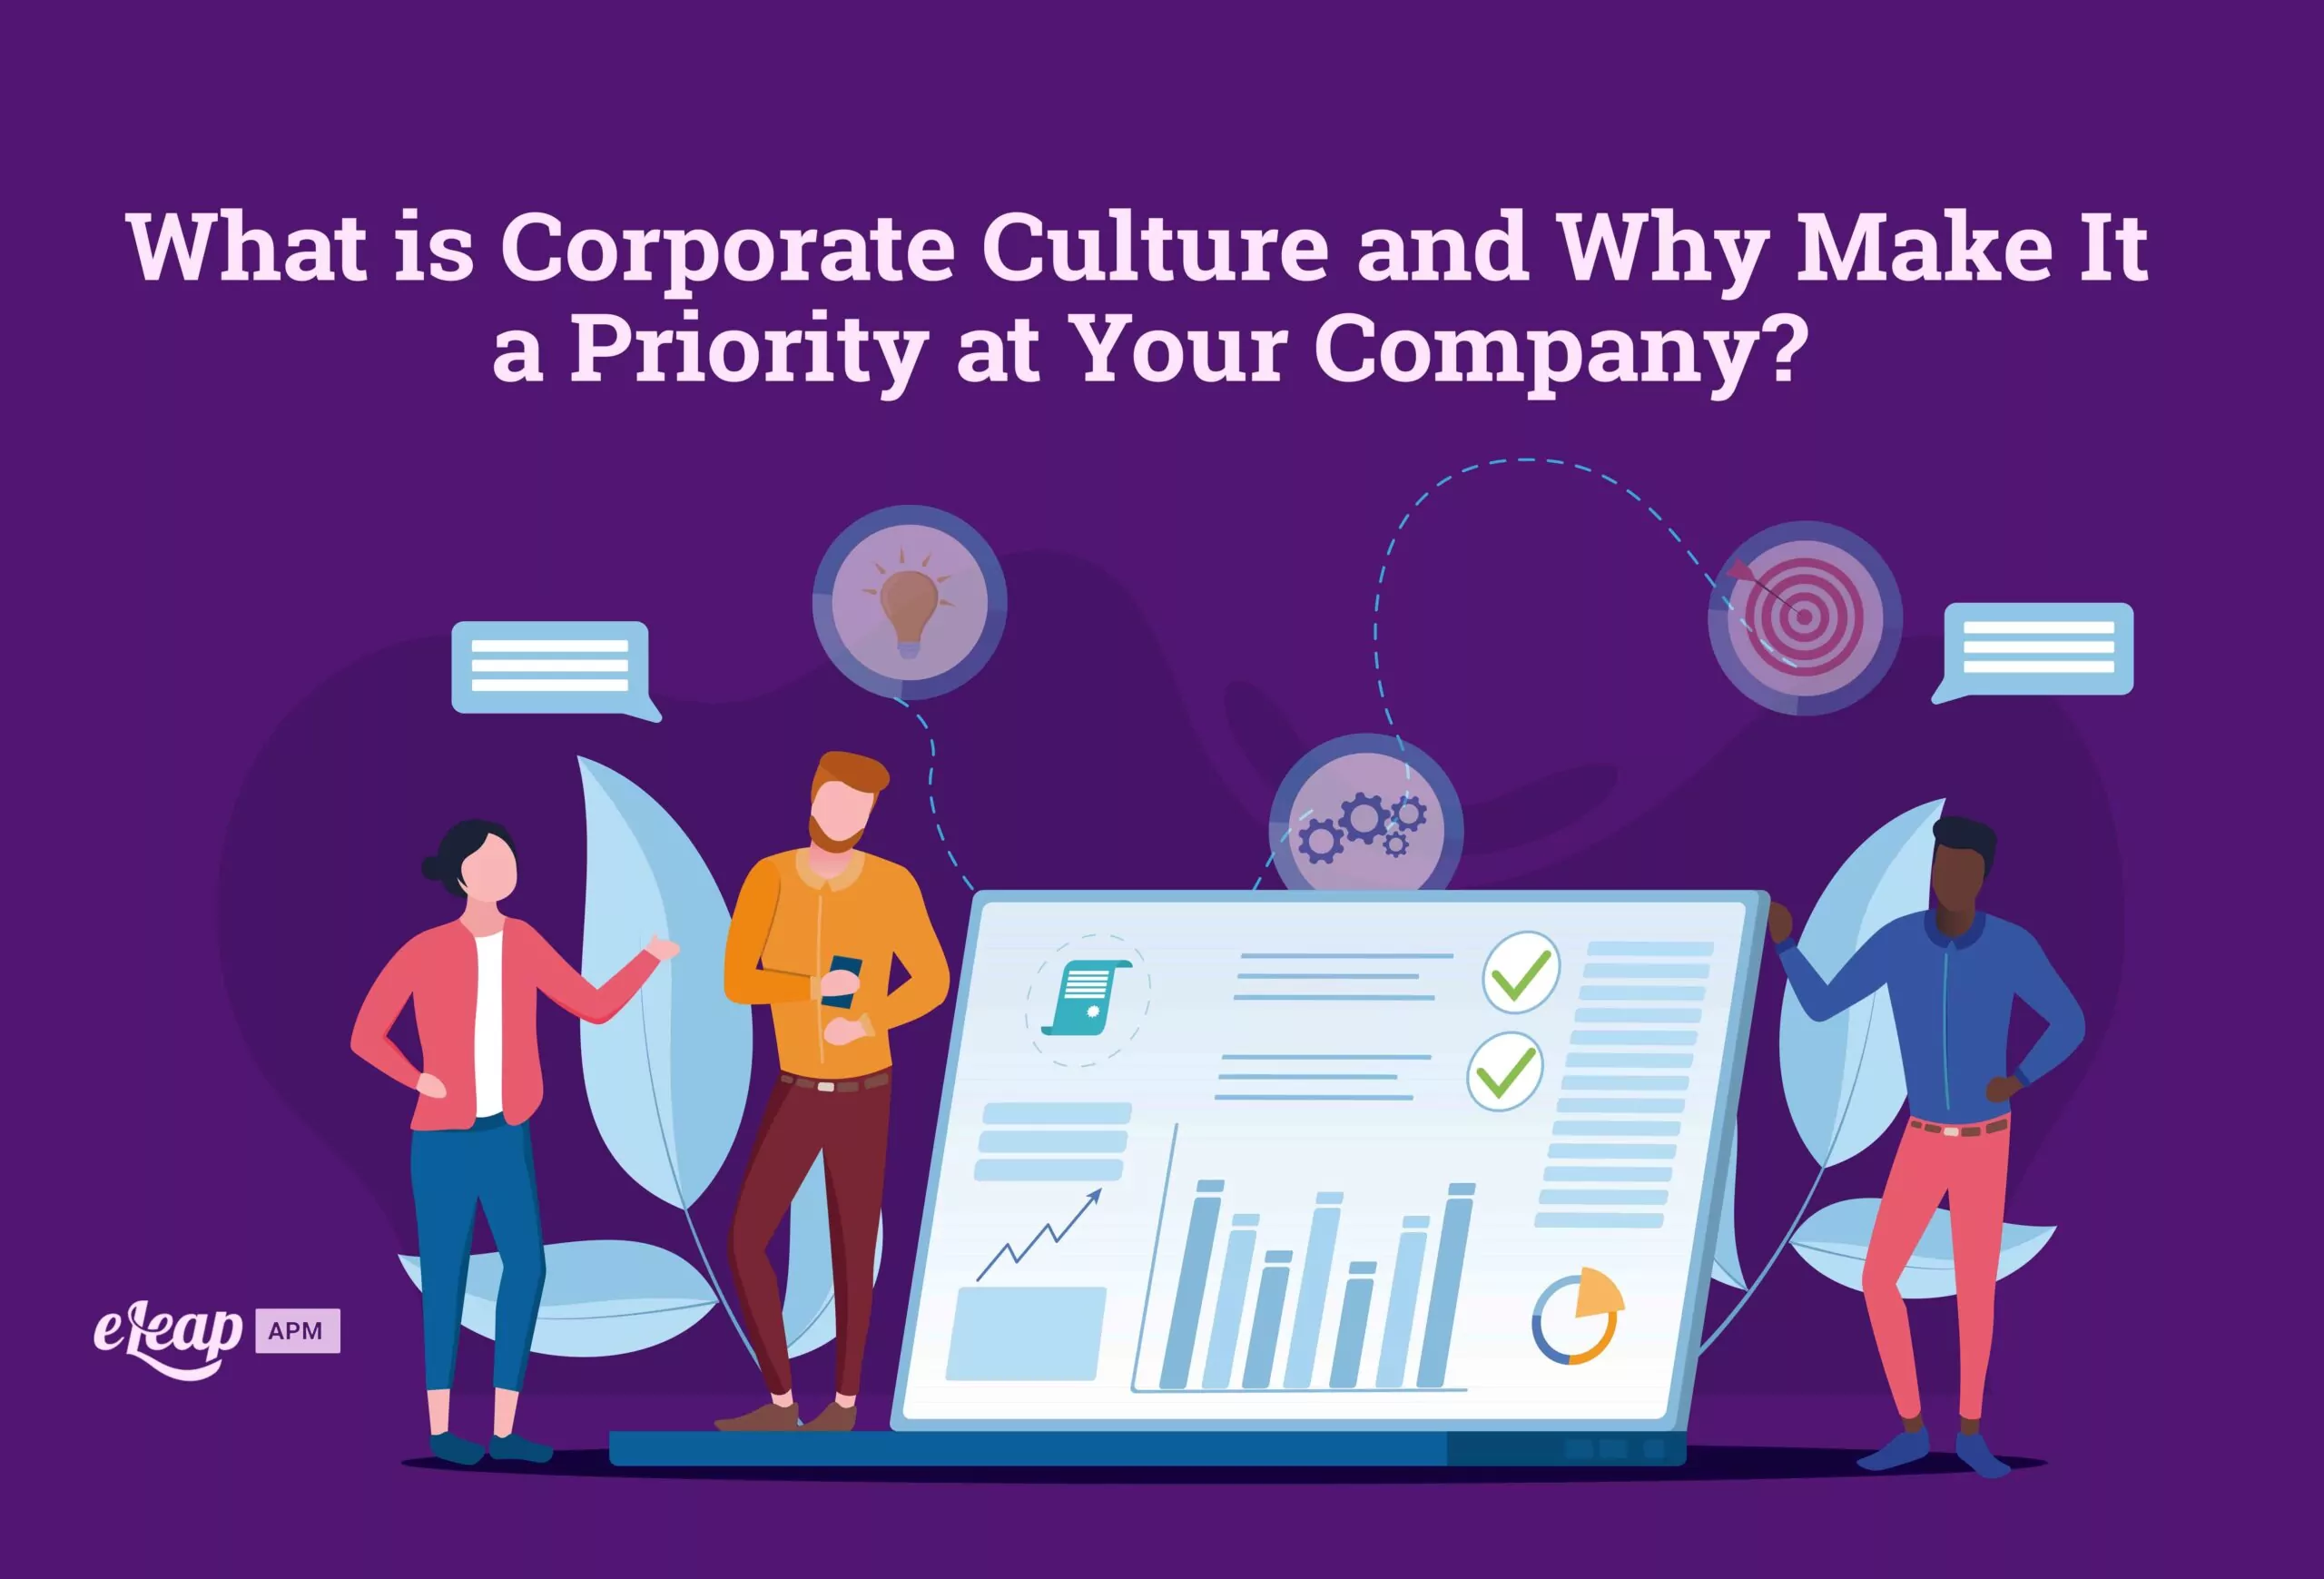 What is Corporate Culture and Why Make It a Priority at Your Company?